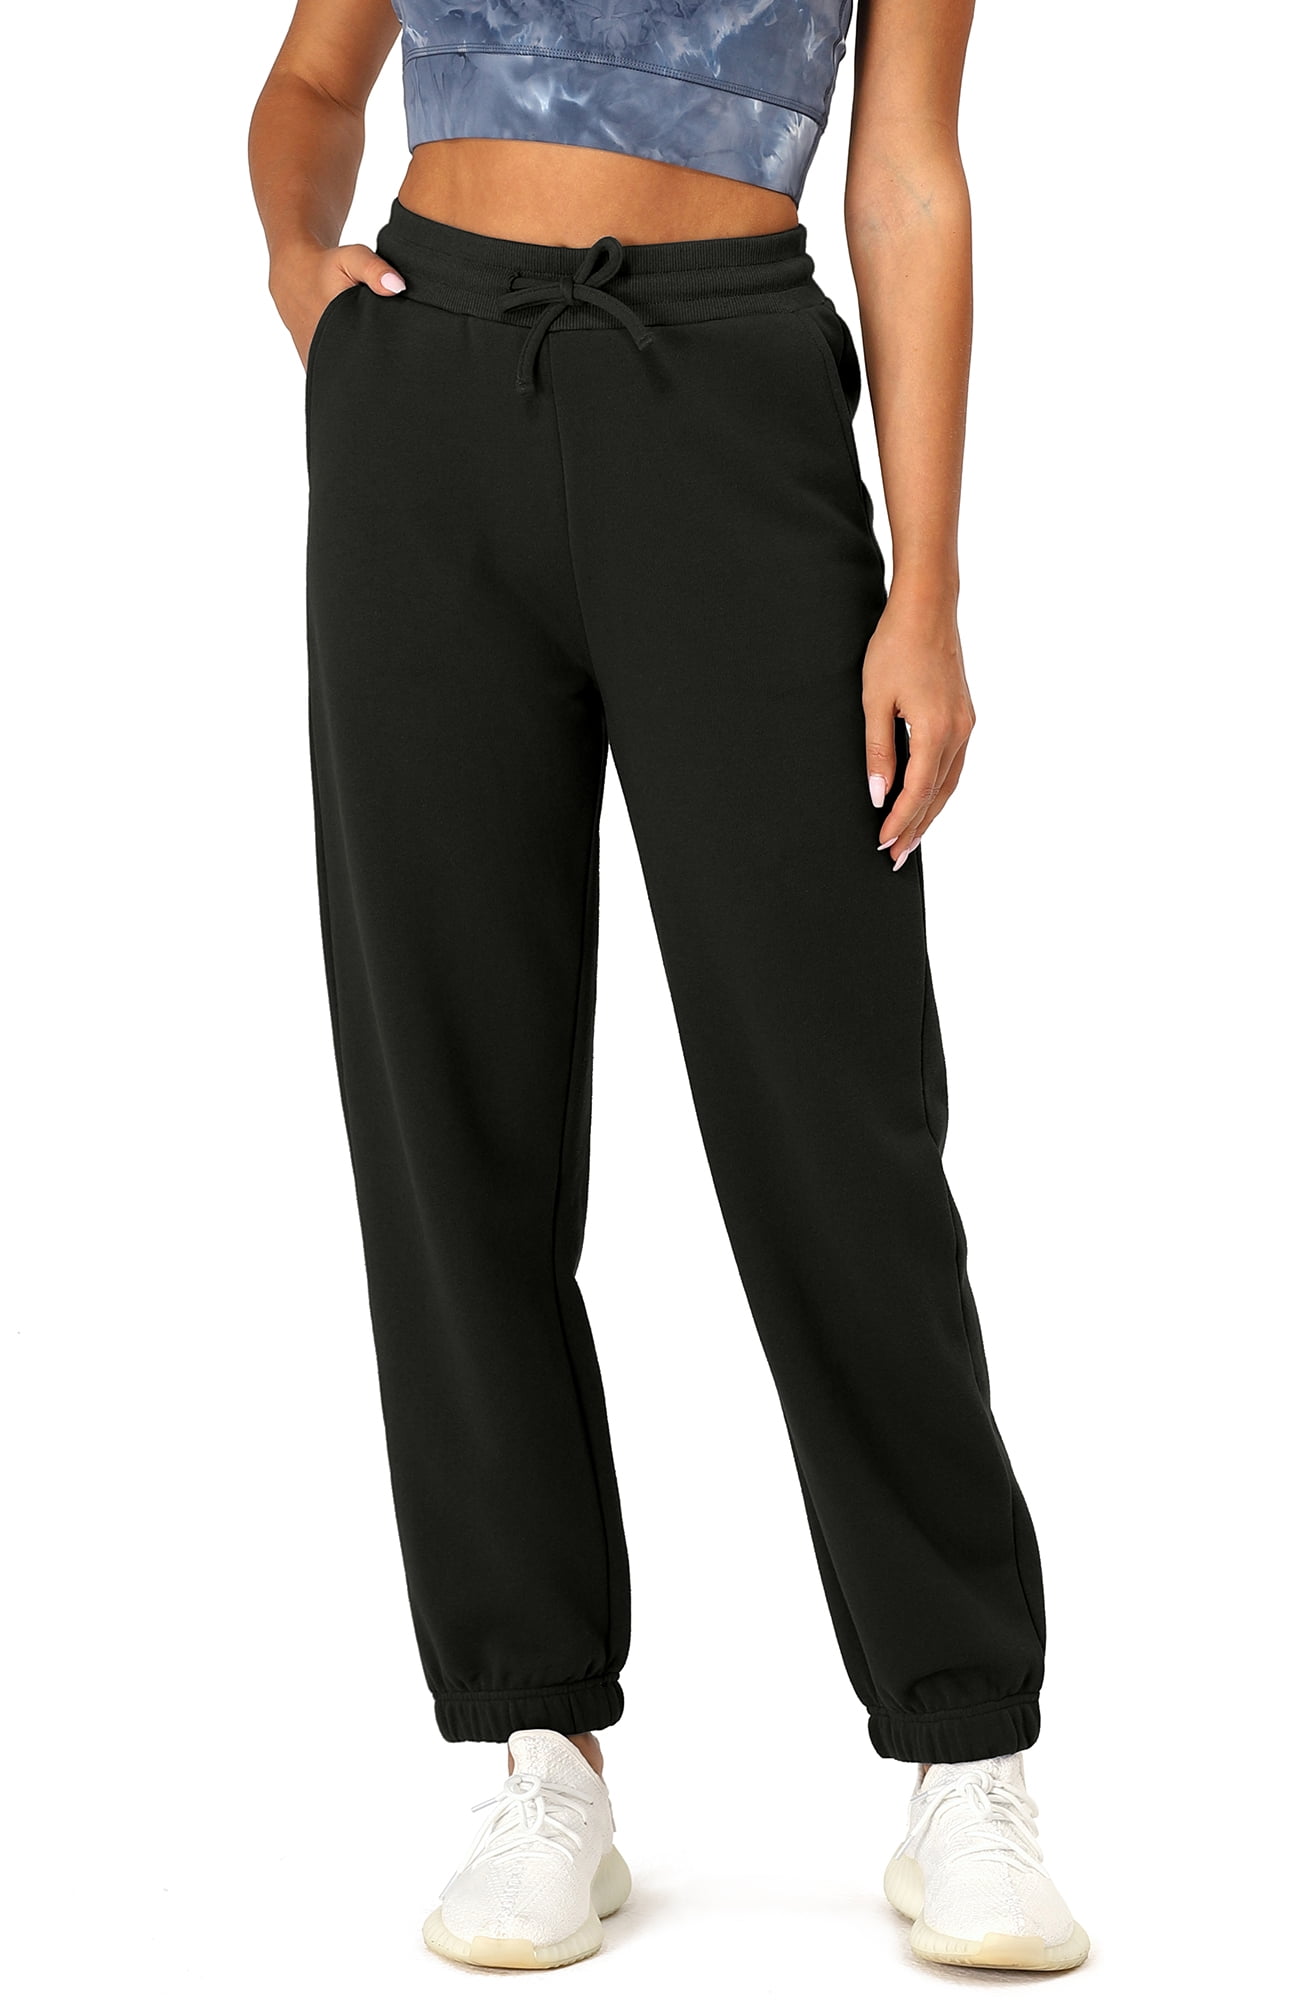 icyzone Fleece Sweatpants for Women, Athletic Joggers with Pockets ...